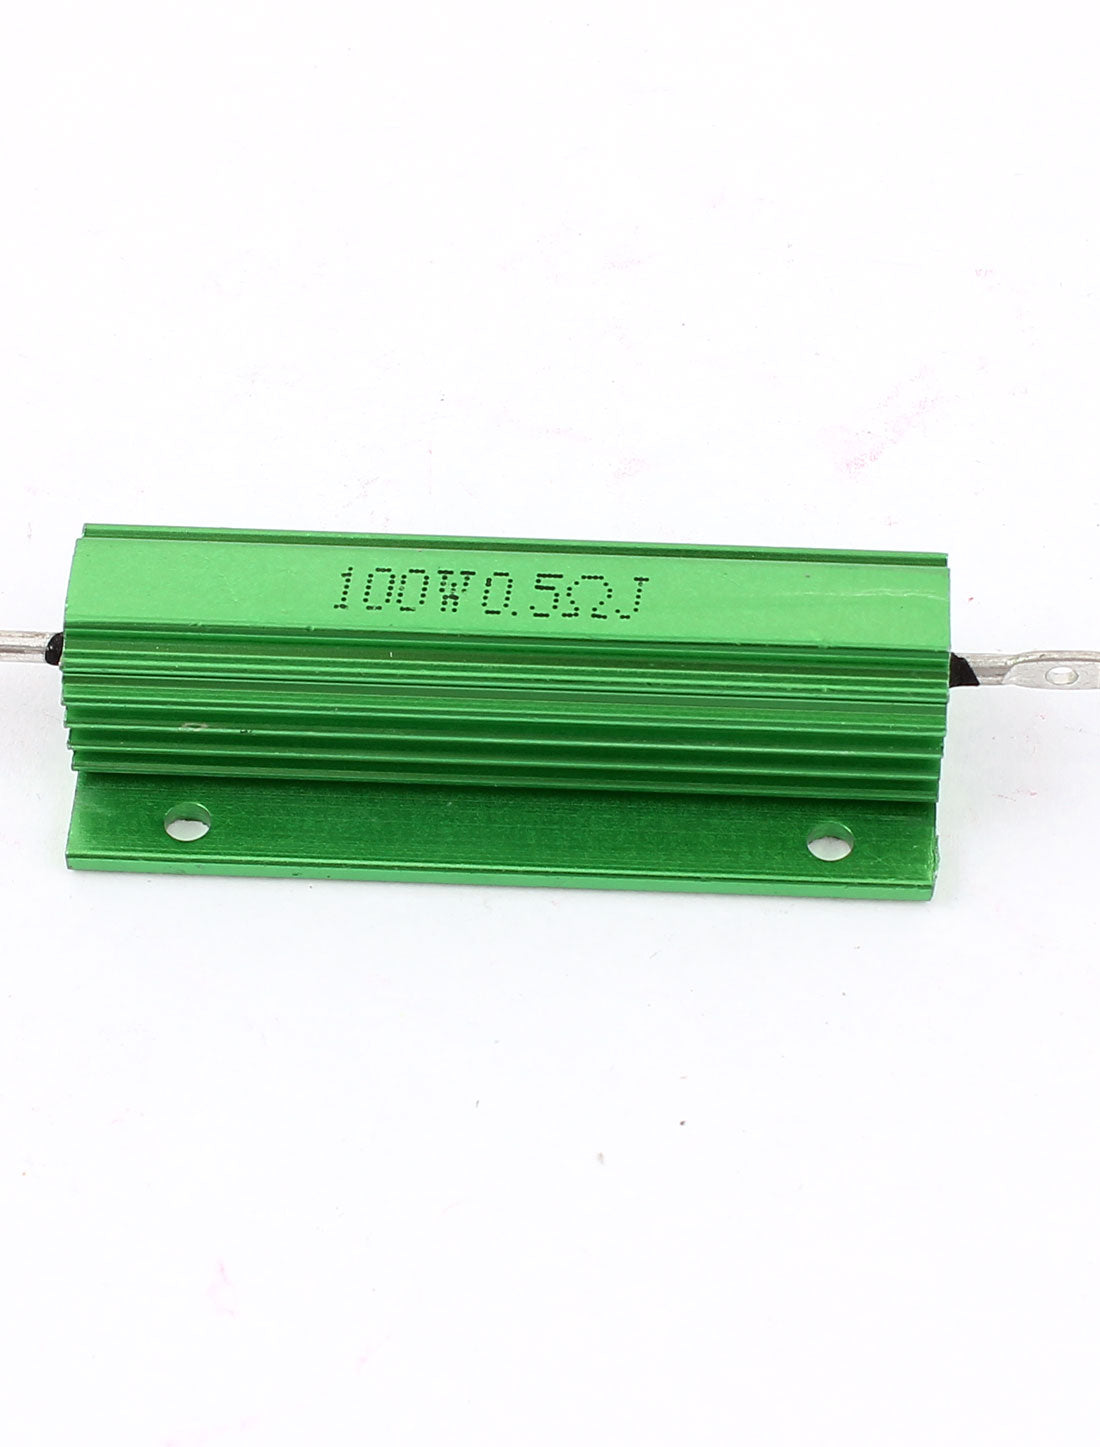 uxcell Uxcell Aluminum Shell 100W Watt 0.5 Ohm Chassis Mounted Wirewound Resistor